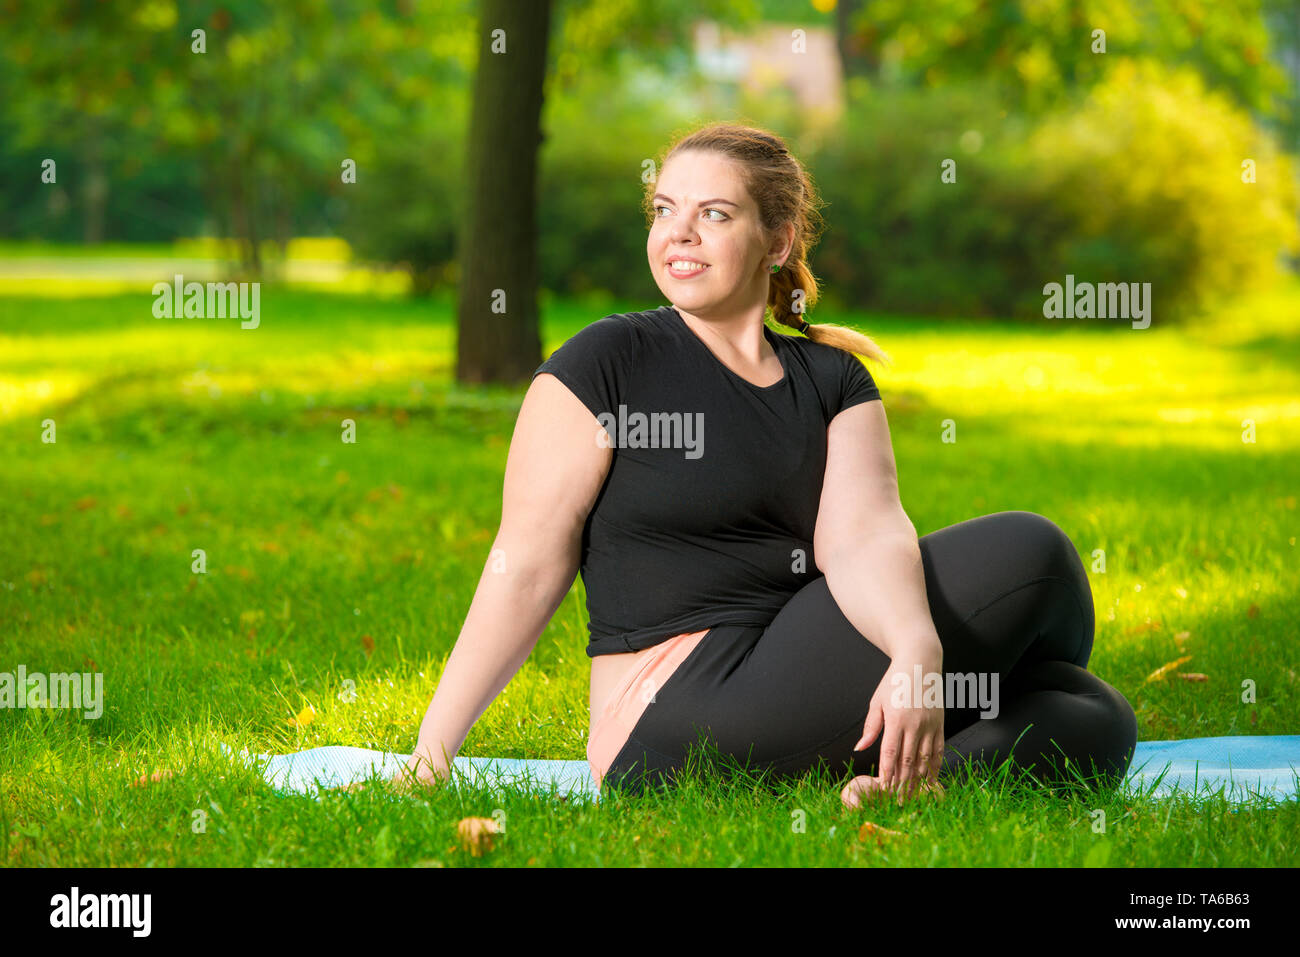 portrait of a plus size model in the park during a yoga class, stretching exercise Stock Photo